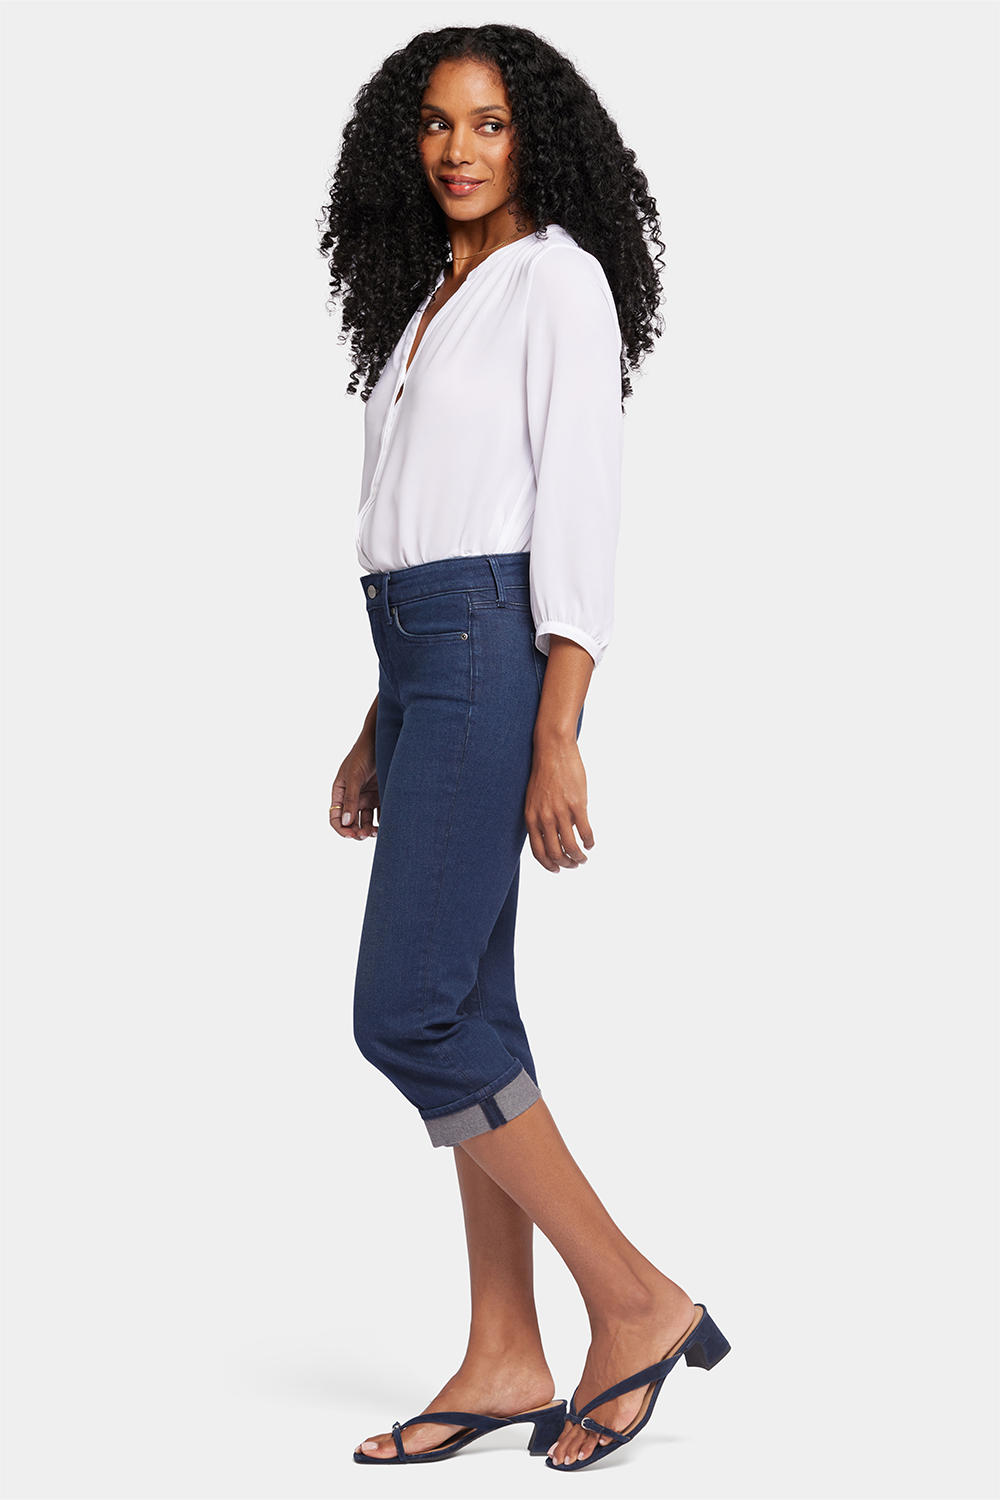 NYDJ Marilyn Straight Crop Jeans With Cuffs - Inspire